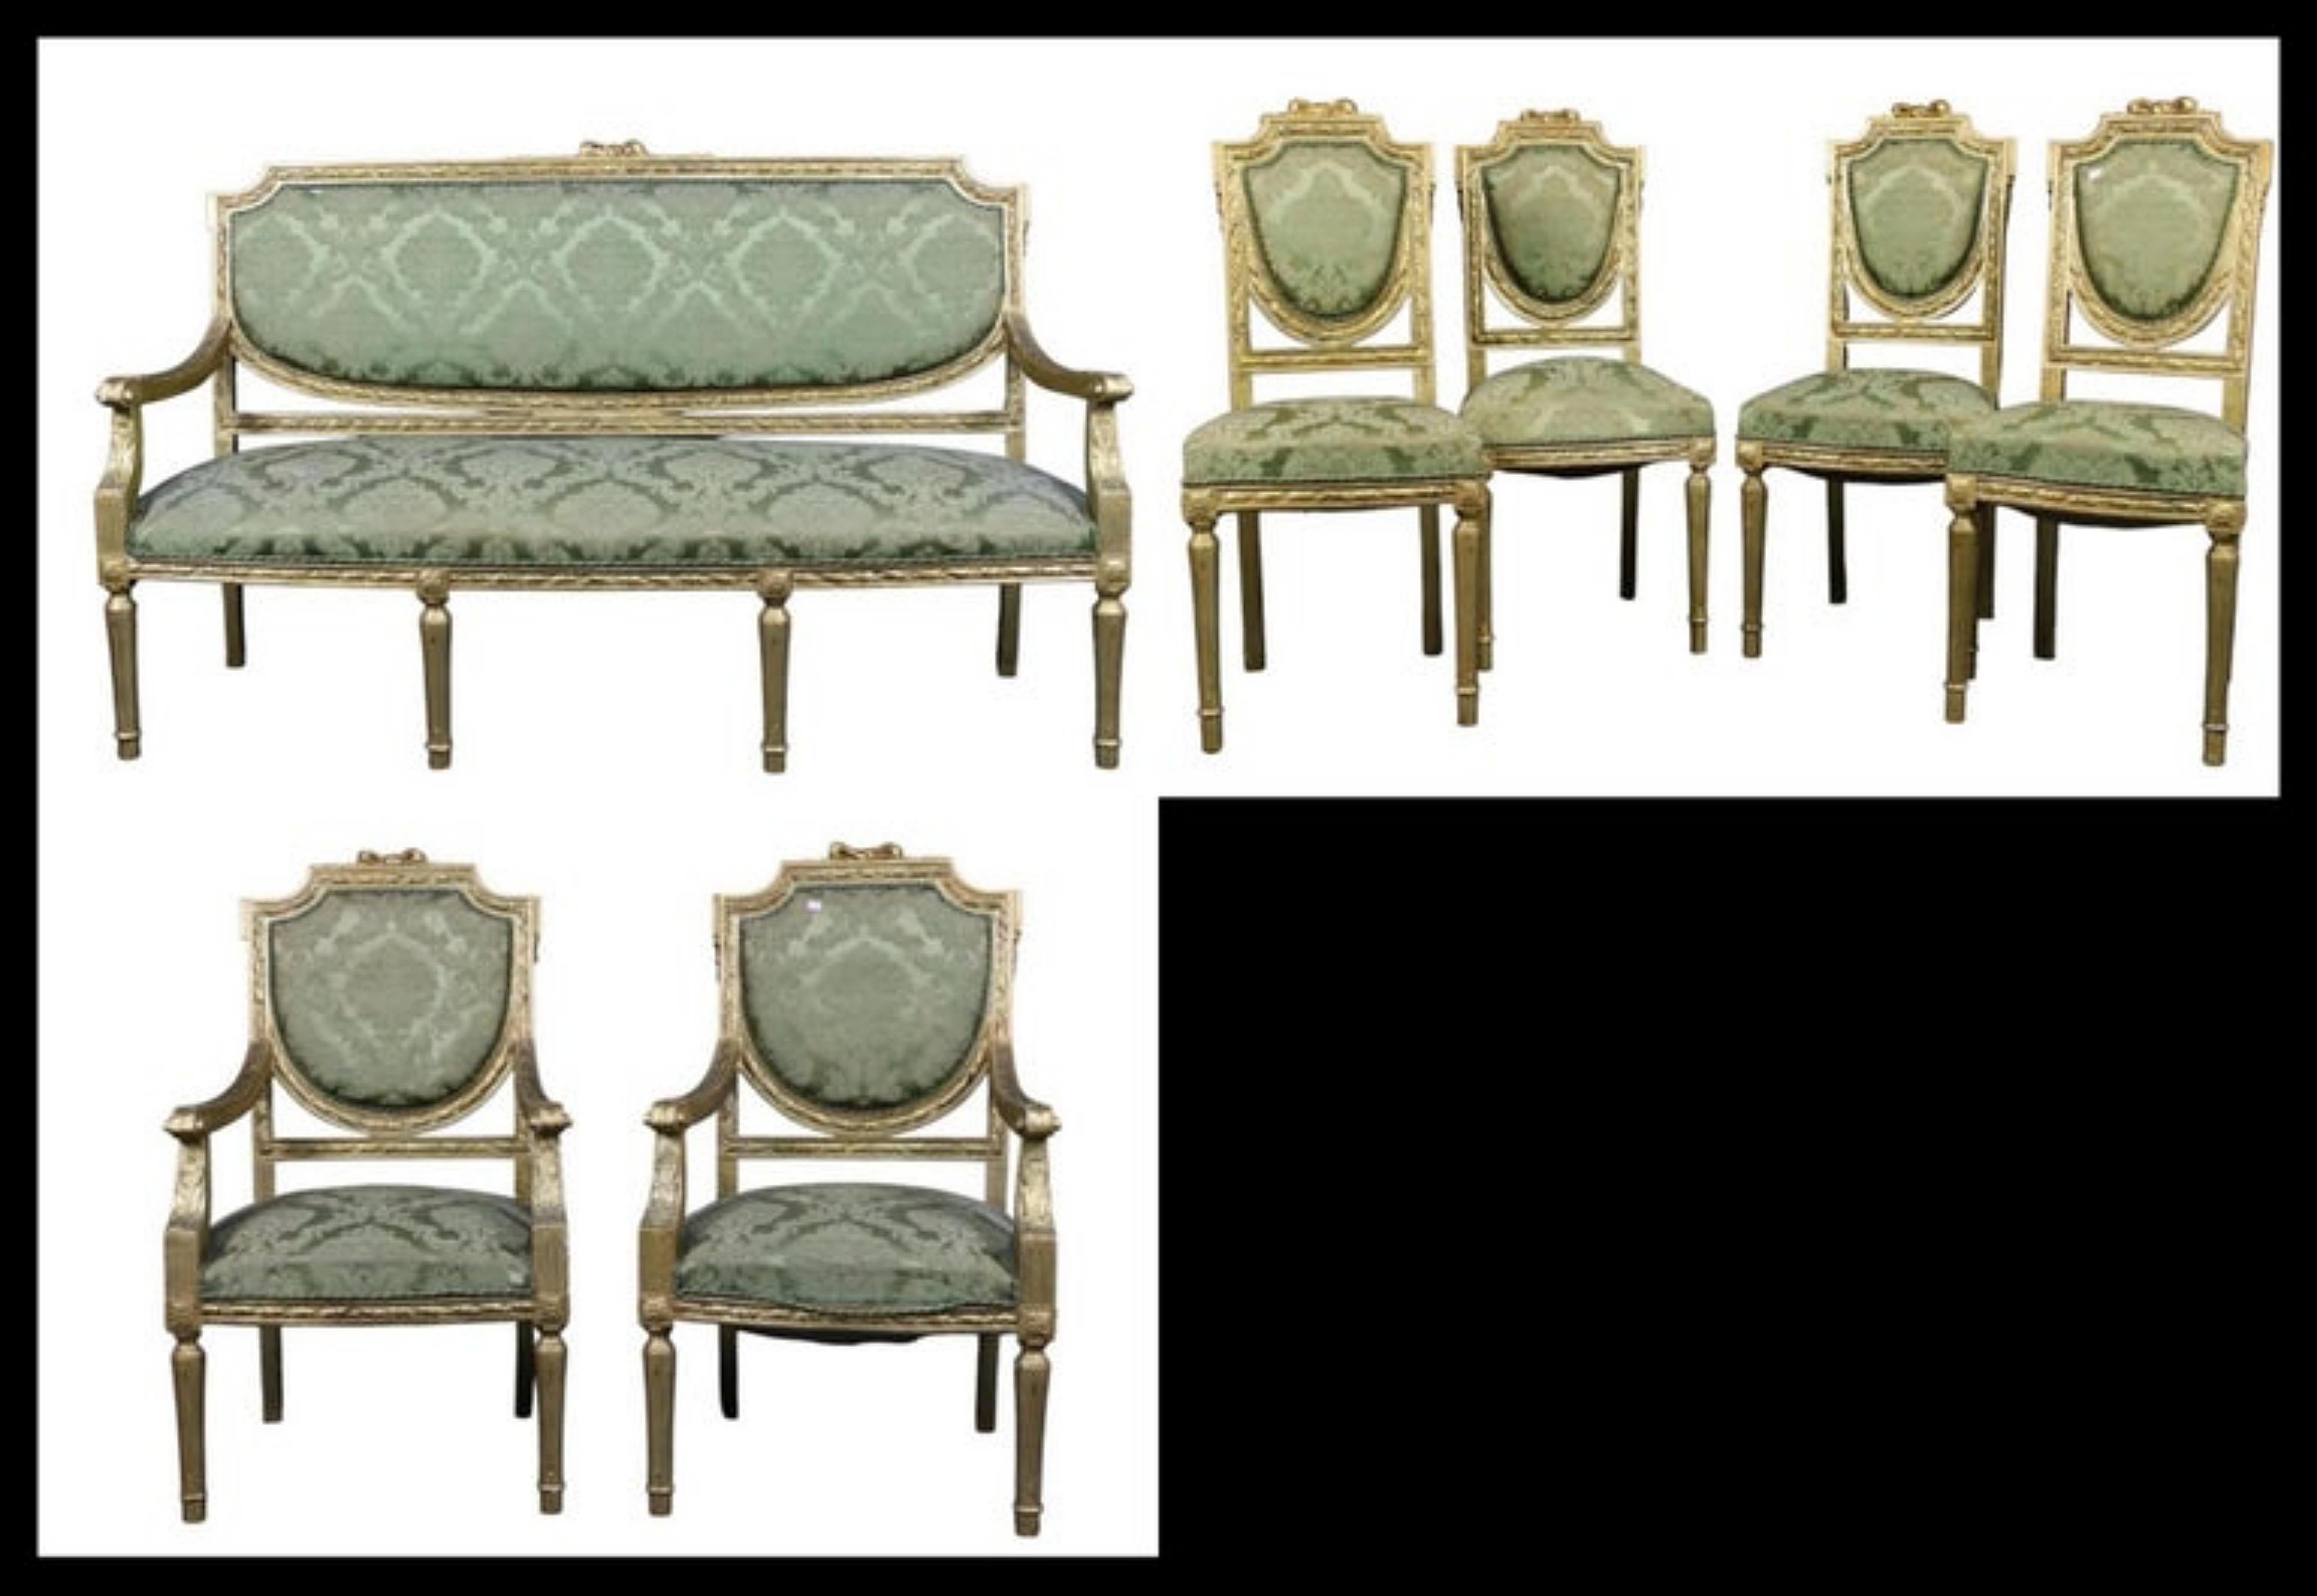 Gorgeous Sicilian Living Room Set - Italy 19th Century

CANAPE
in finely carved and gilded wood Sicily 19th century
h cm 103 x 160 x 57
good conditions

4 CHAIRS
in finely carved and gilded wood Sicily 19th century
h cm 101 x 46 x 43
good